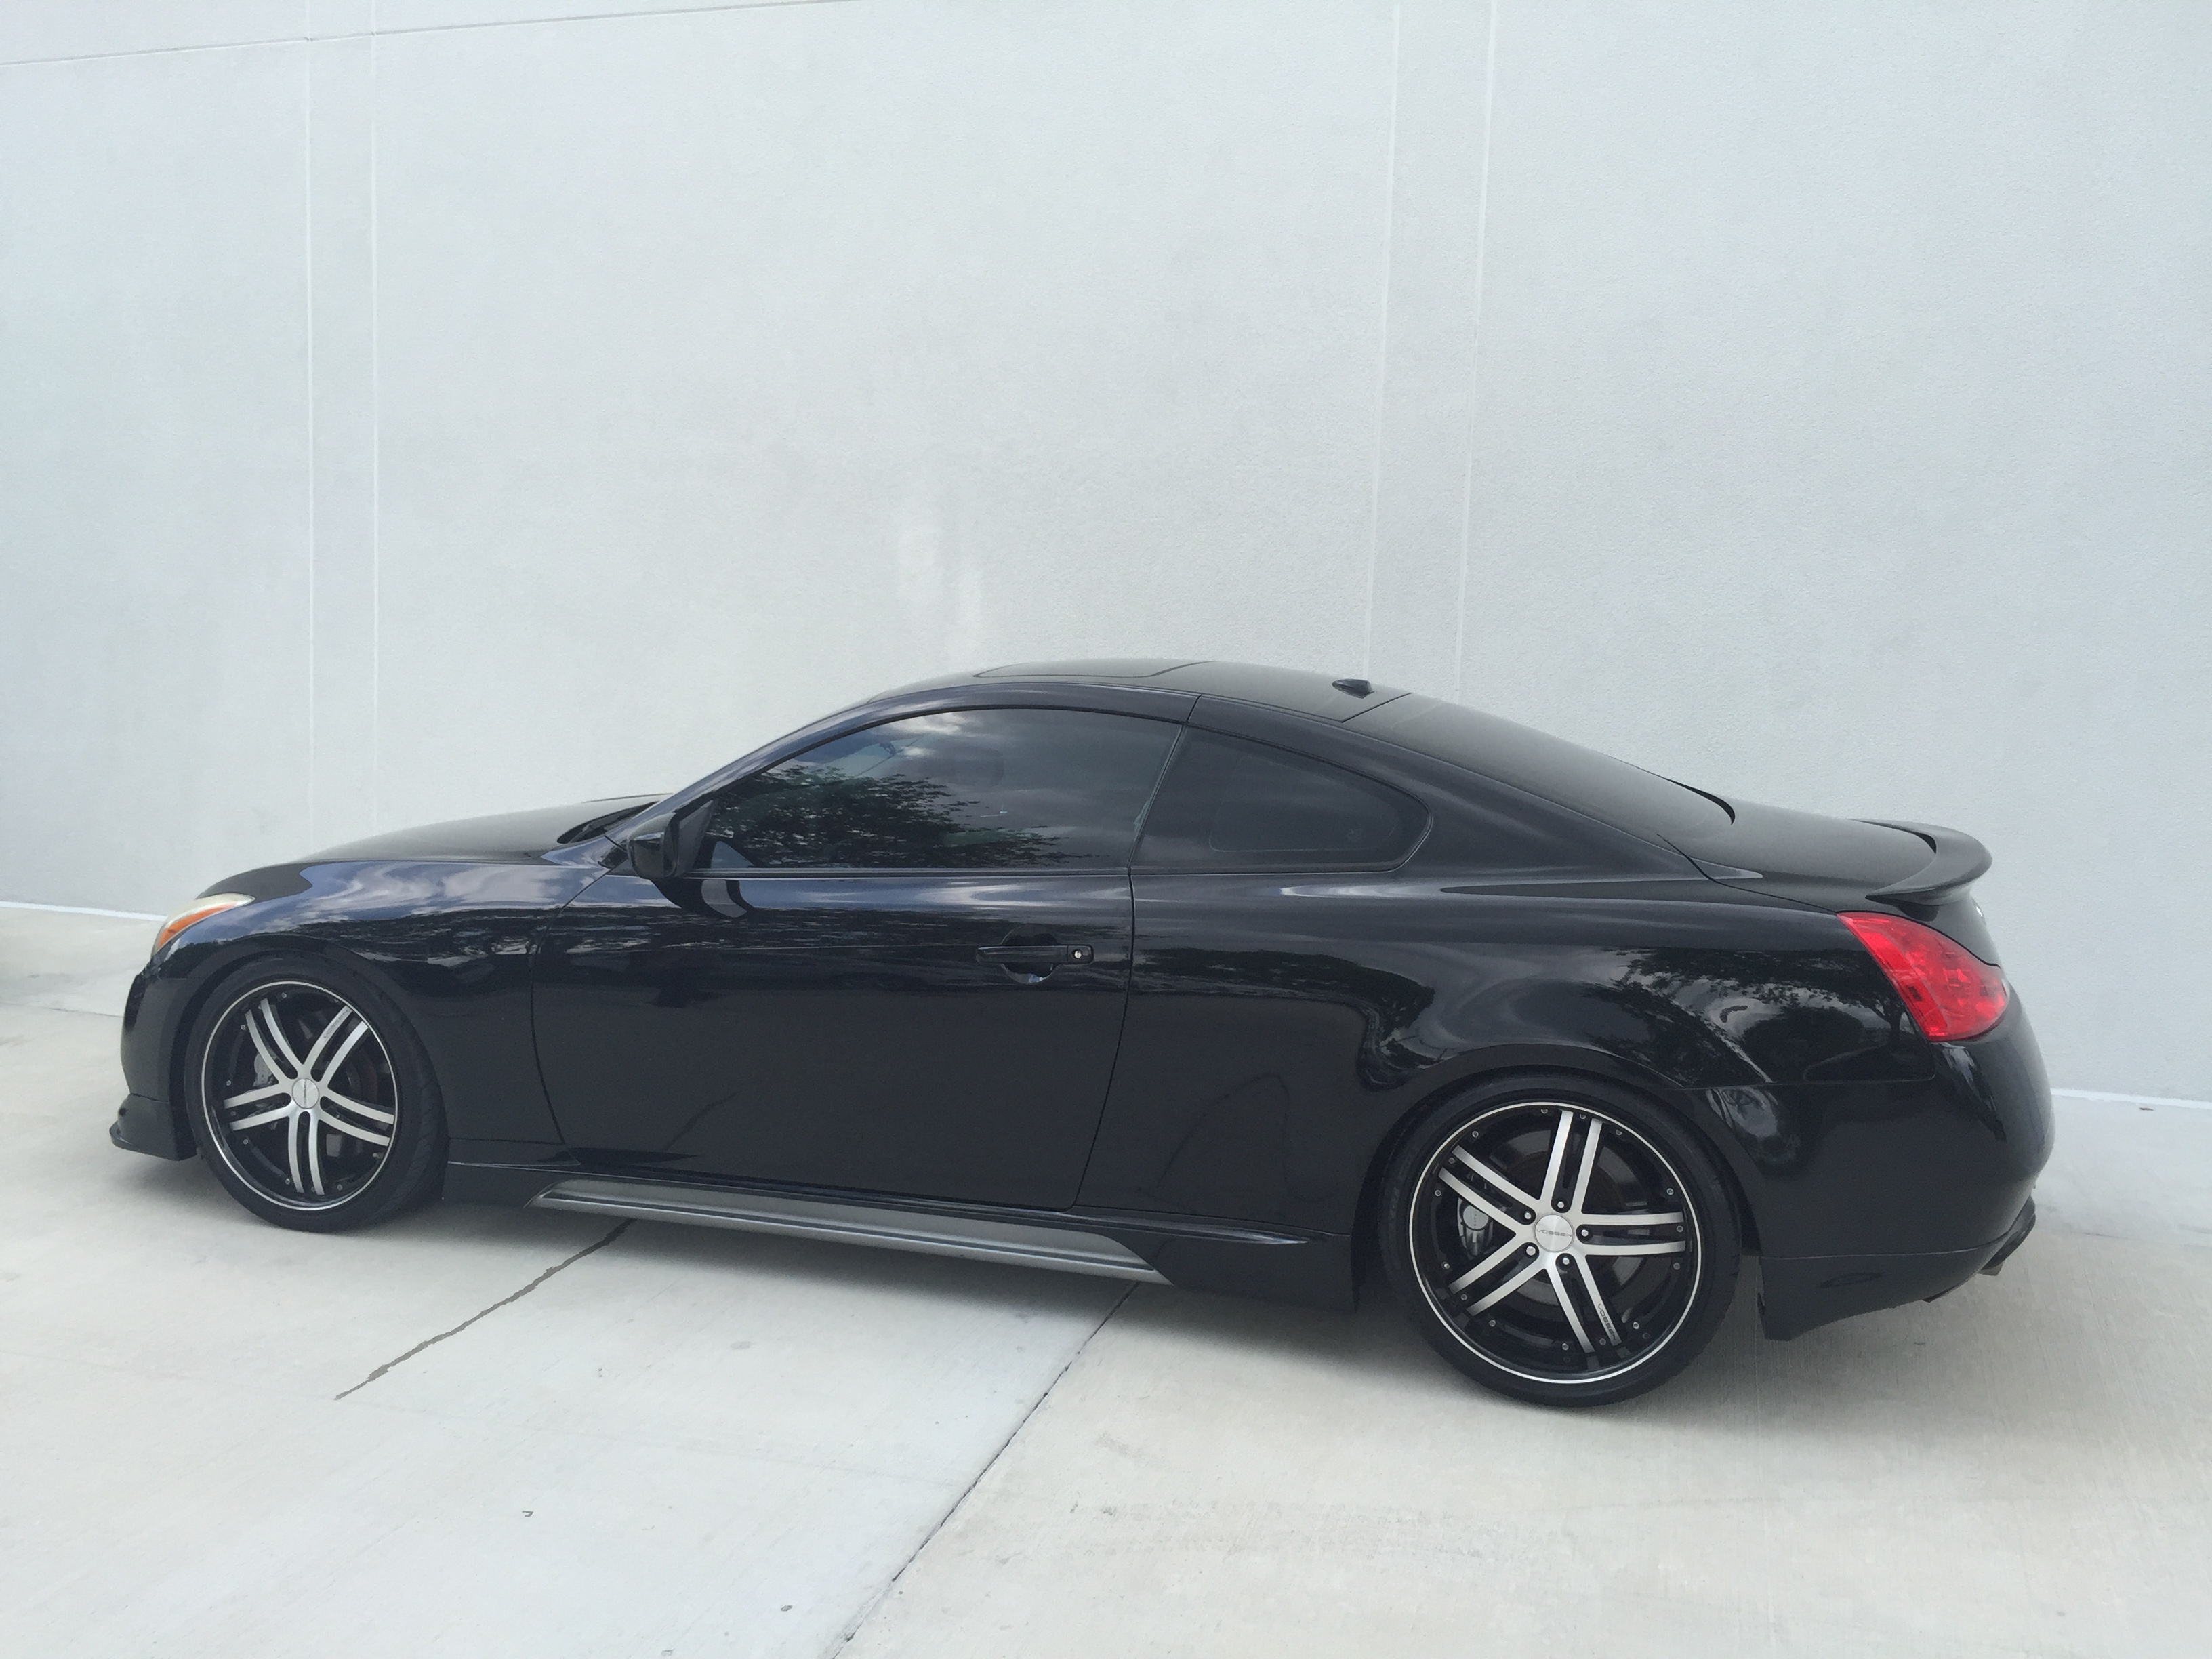 For Sale 2008 Infiniti G37 Modified Sport Coupe - MyG37